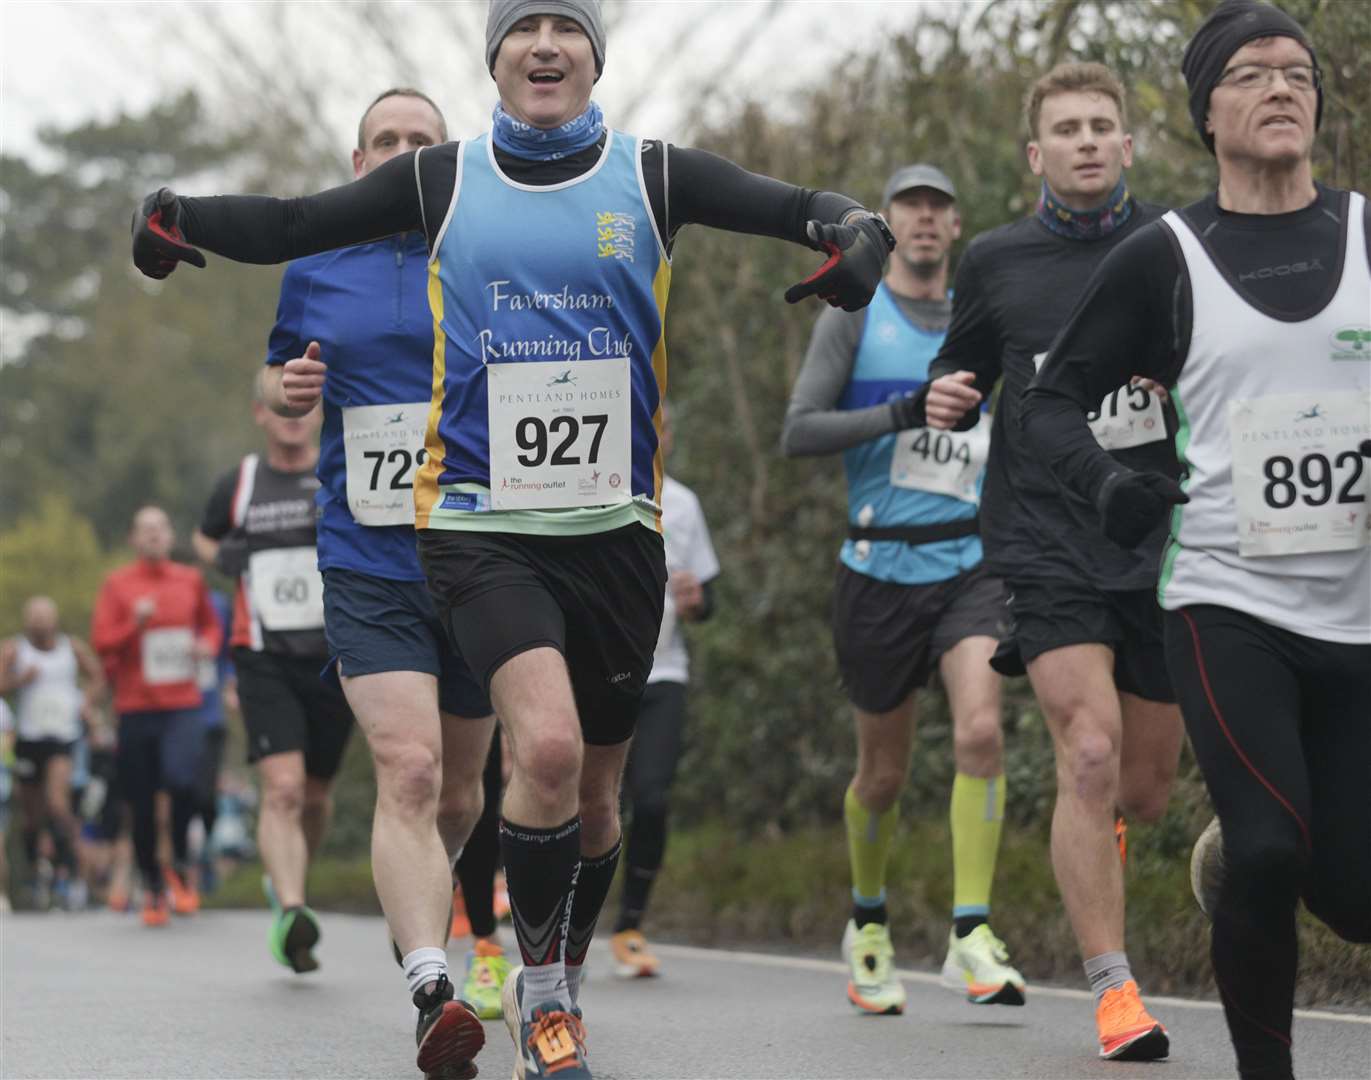 Nick O'Shea of Faversham Running Club (No.927) keeps his spirits up. Picture: Barry Goodwin (62013624)